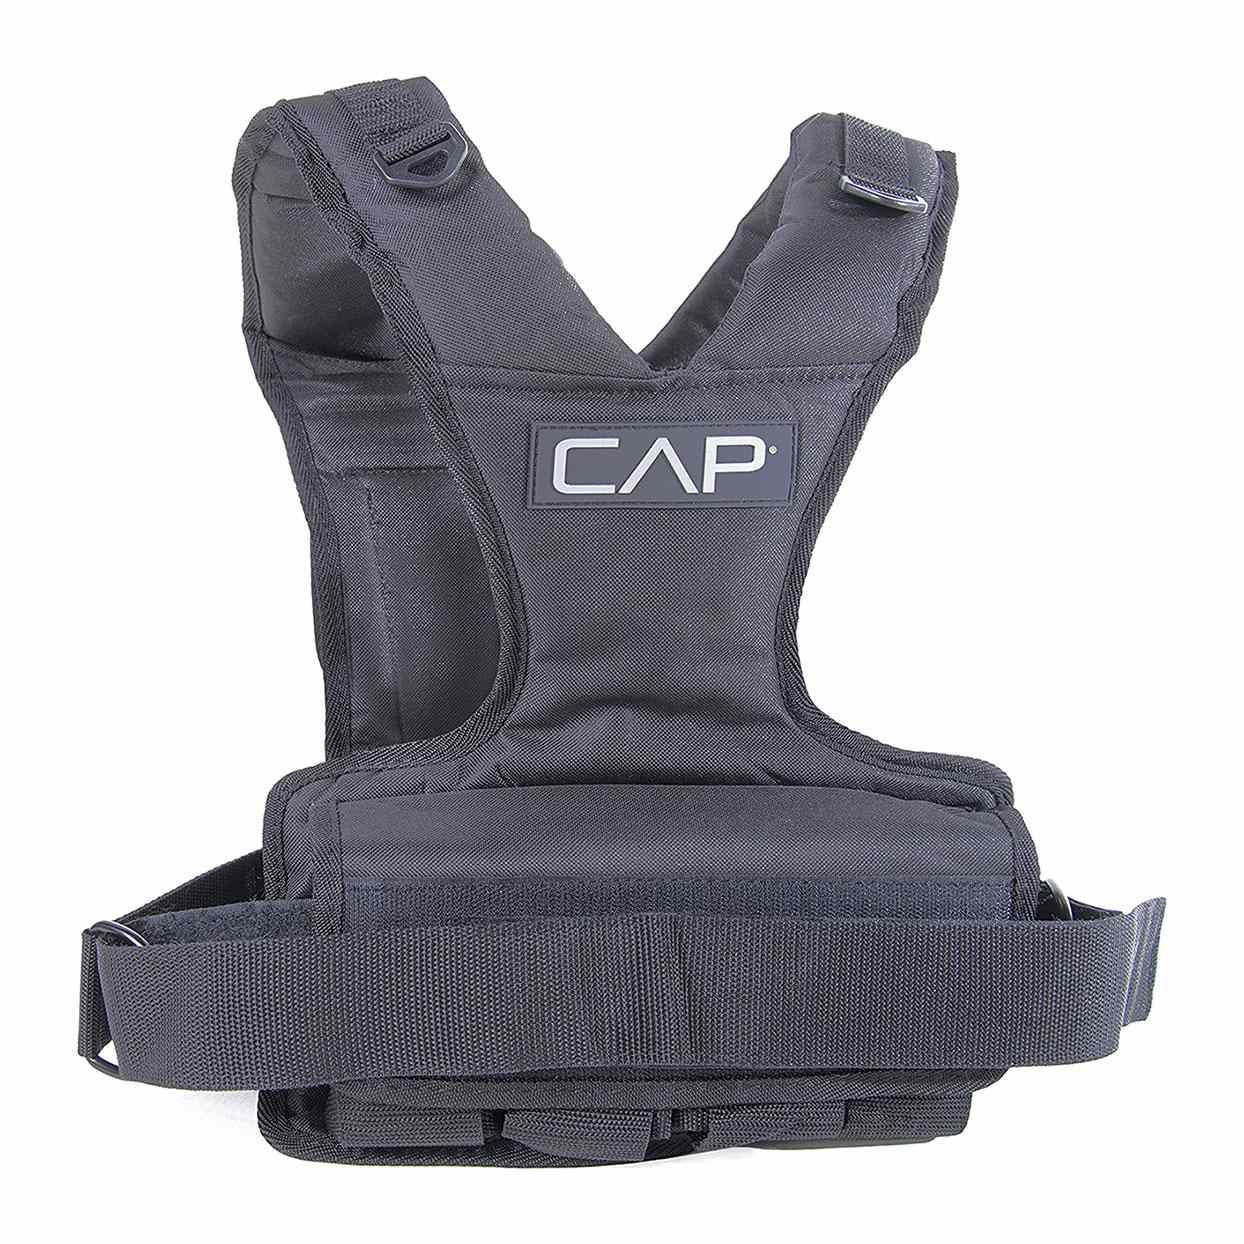 cap-barbell-weighted-vest-workouts